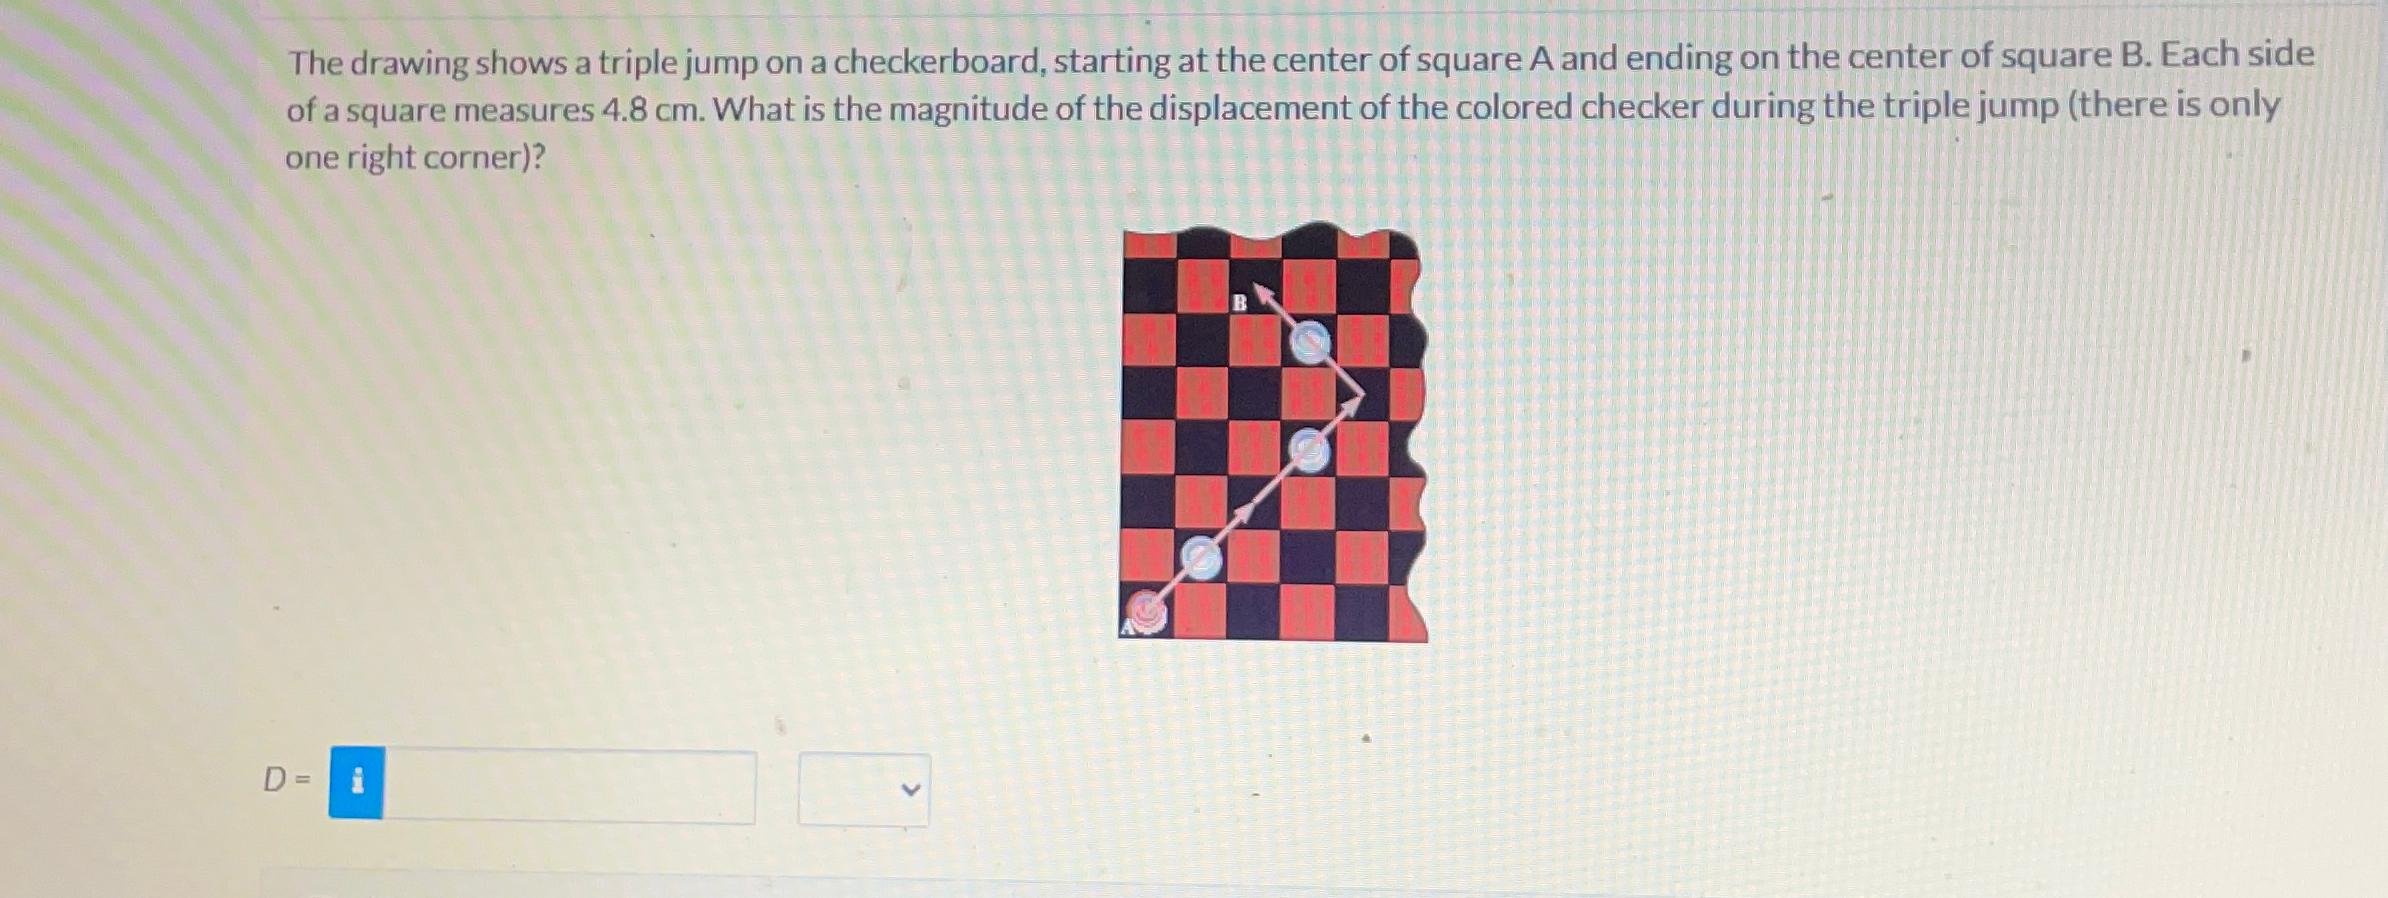 Solved The drawing shows a triple jump on a checkerboard,